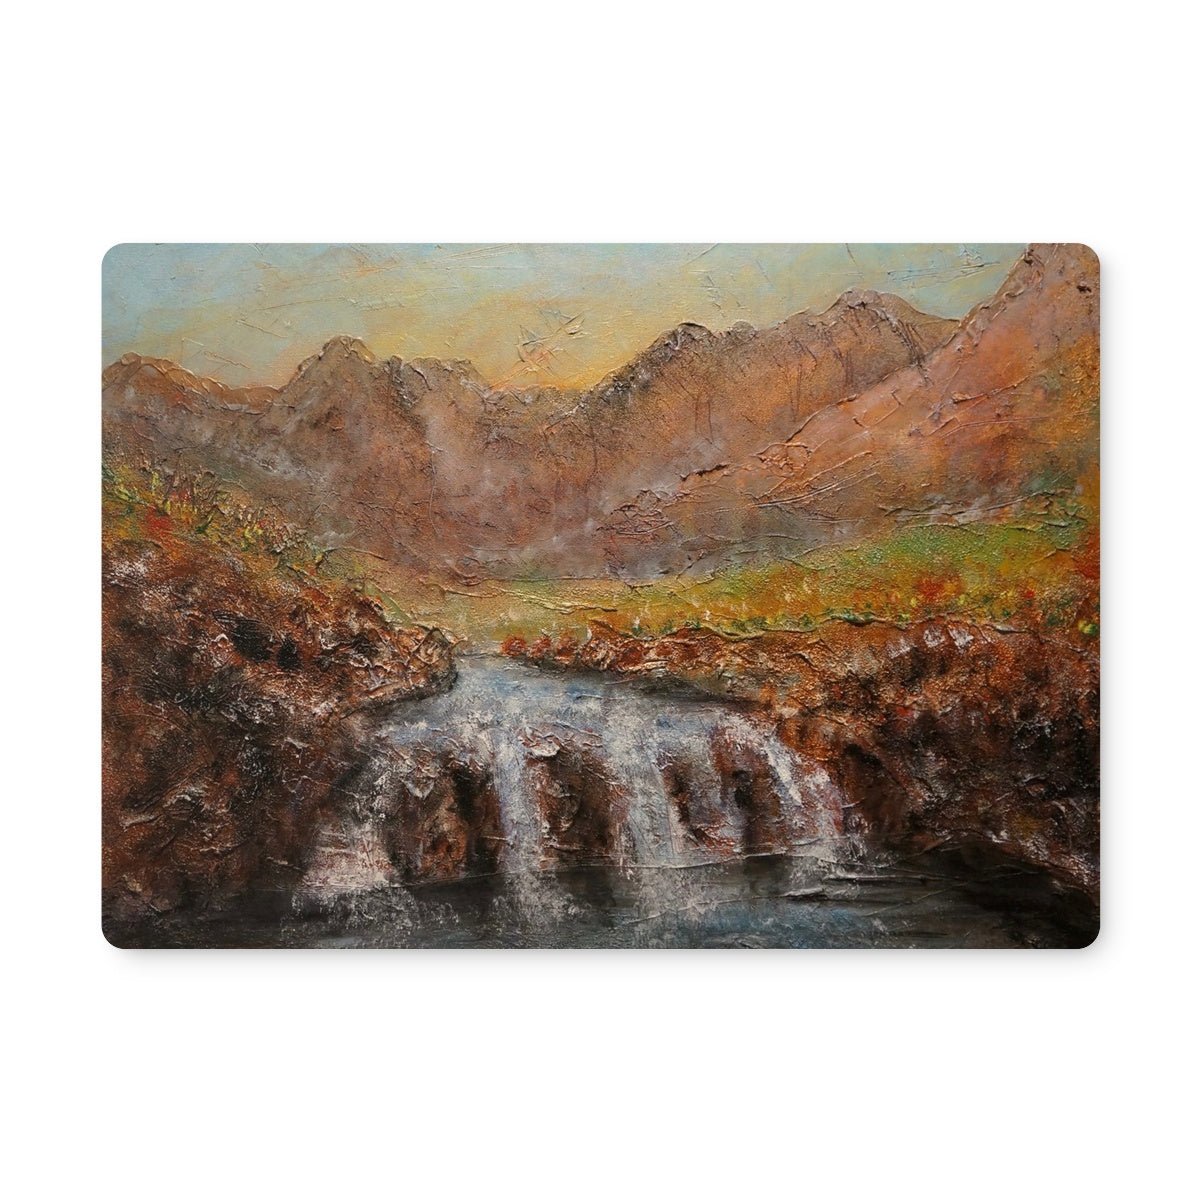 Fairy Pools Dawn Skye Art Gifts Placemat-Placemats-Skye Art Gallery-4 Placemats-Paintings, Prints, Homeware, Art Gifts From Scotland By Scottish Artist Kevin Hunter